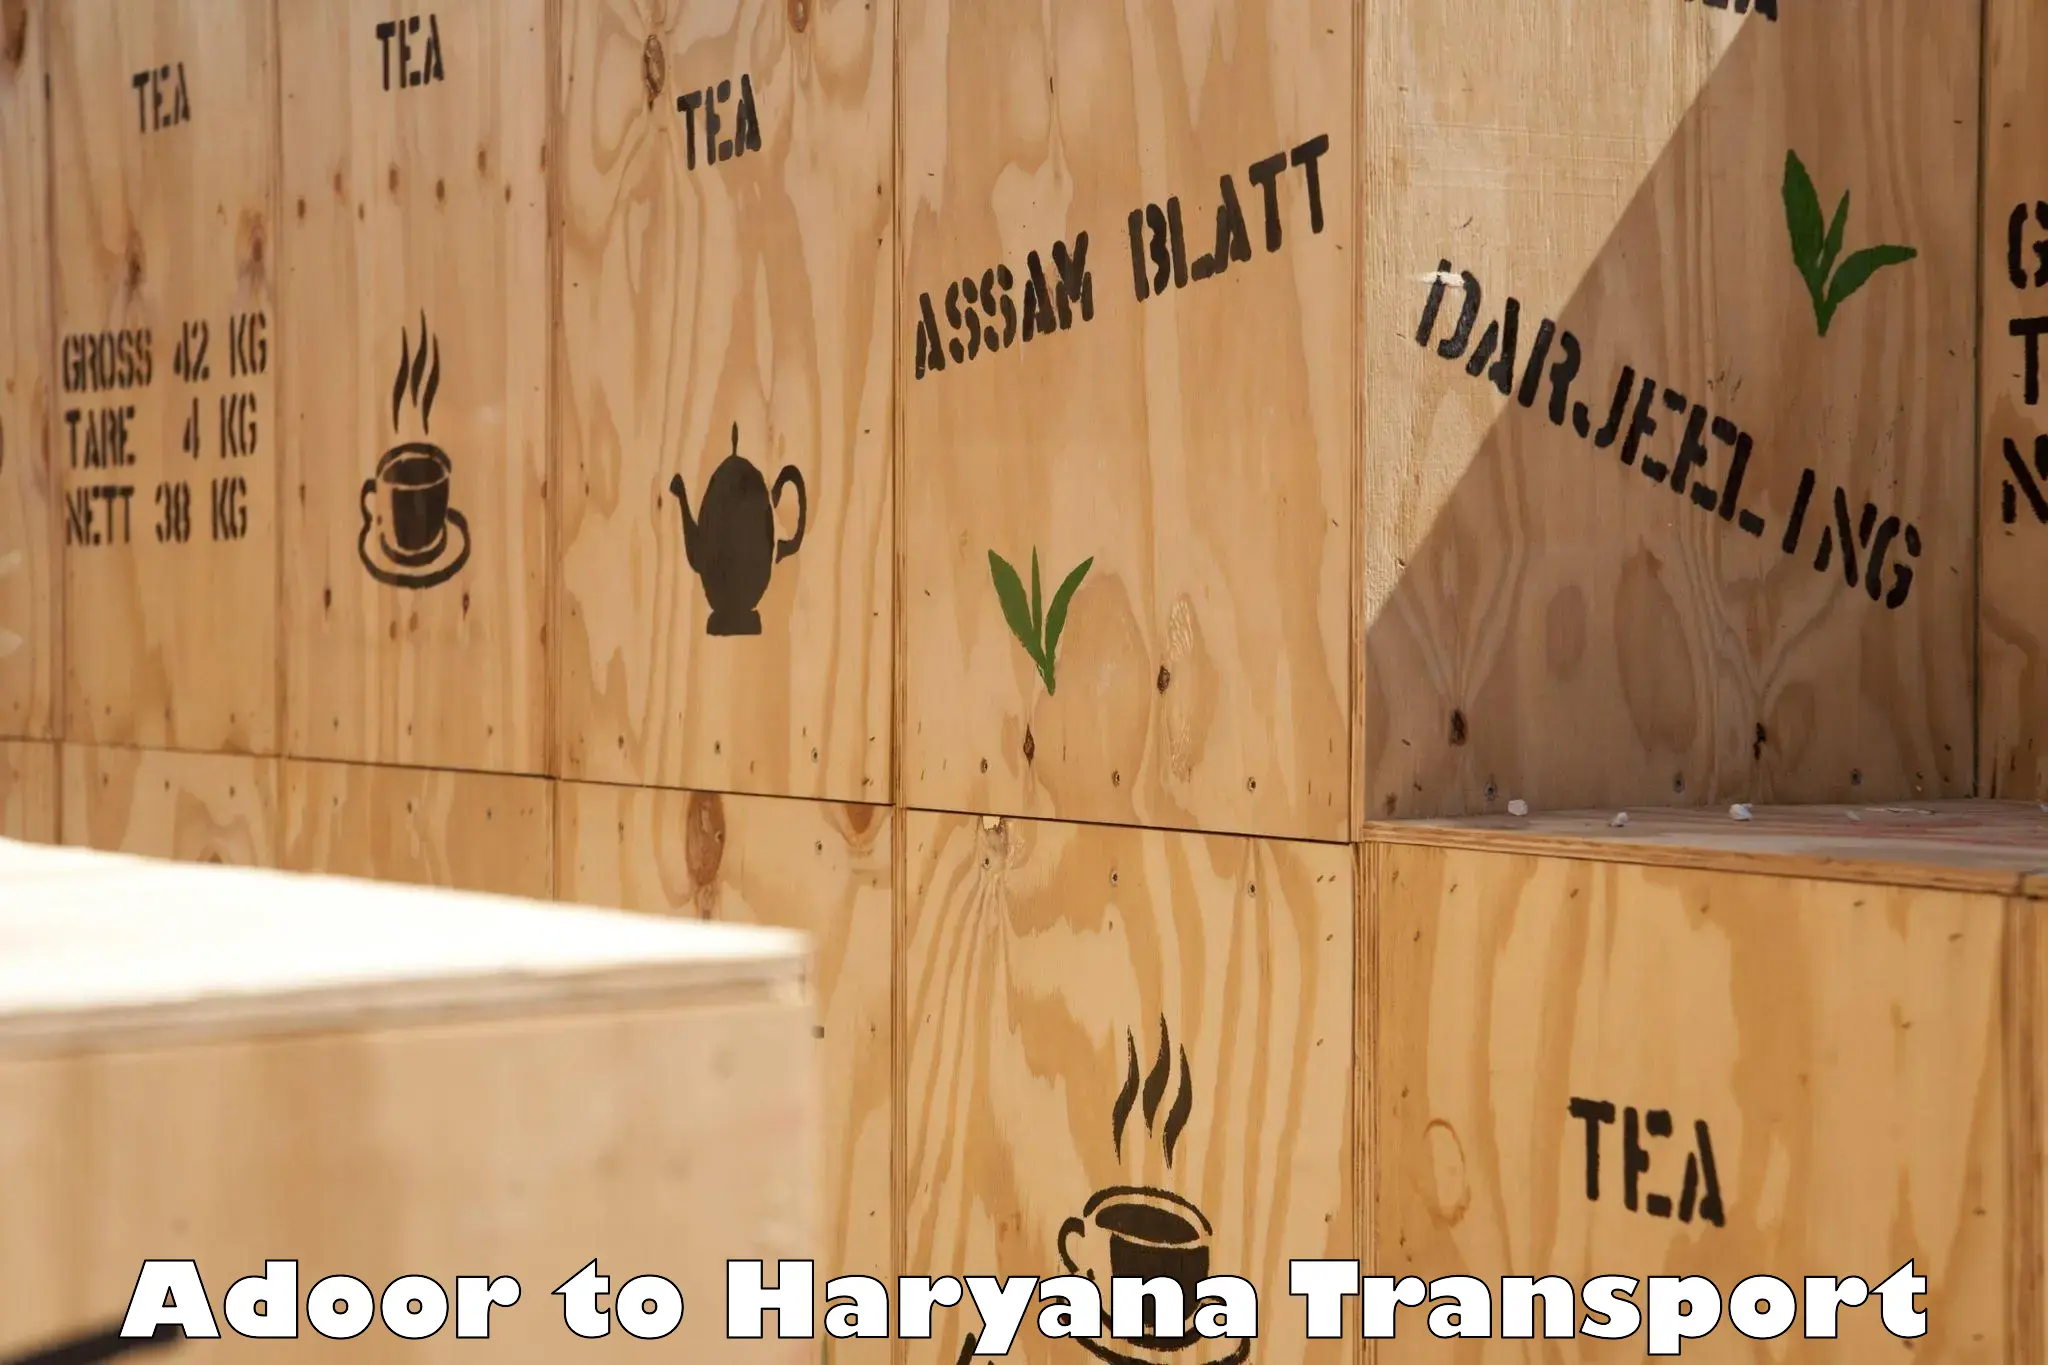 Nearby transport service Adoor to Haryana